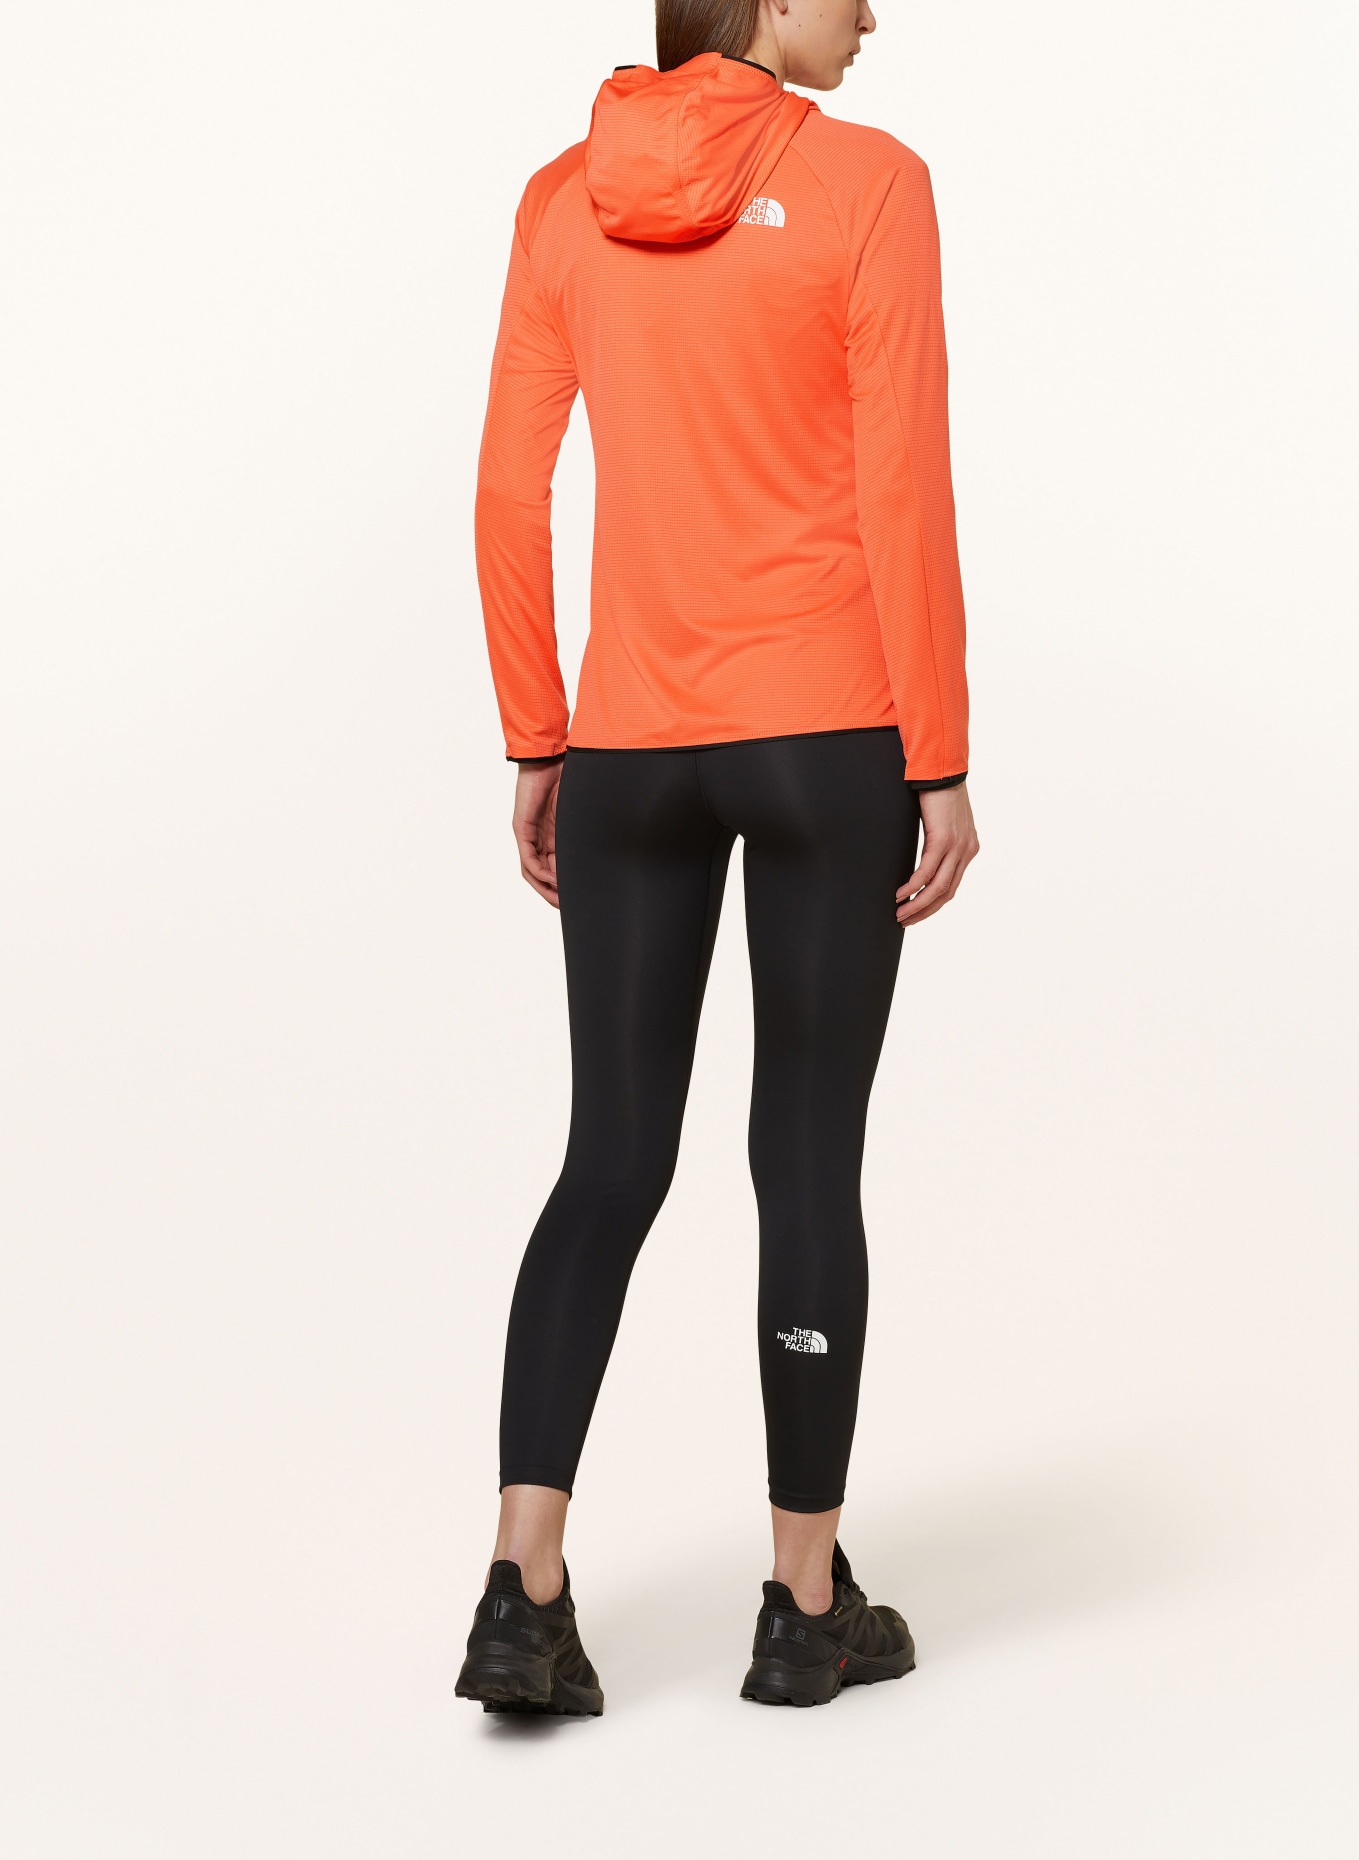 THE NORTH FACE Undershirt SUMMIT with UV protection, Color: ORANGE (Image 3)